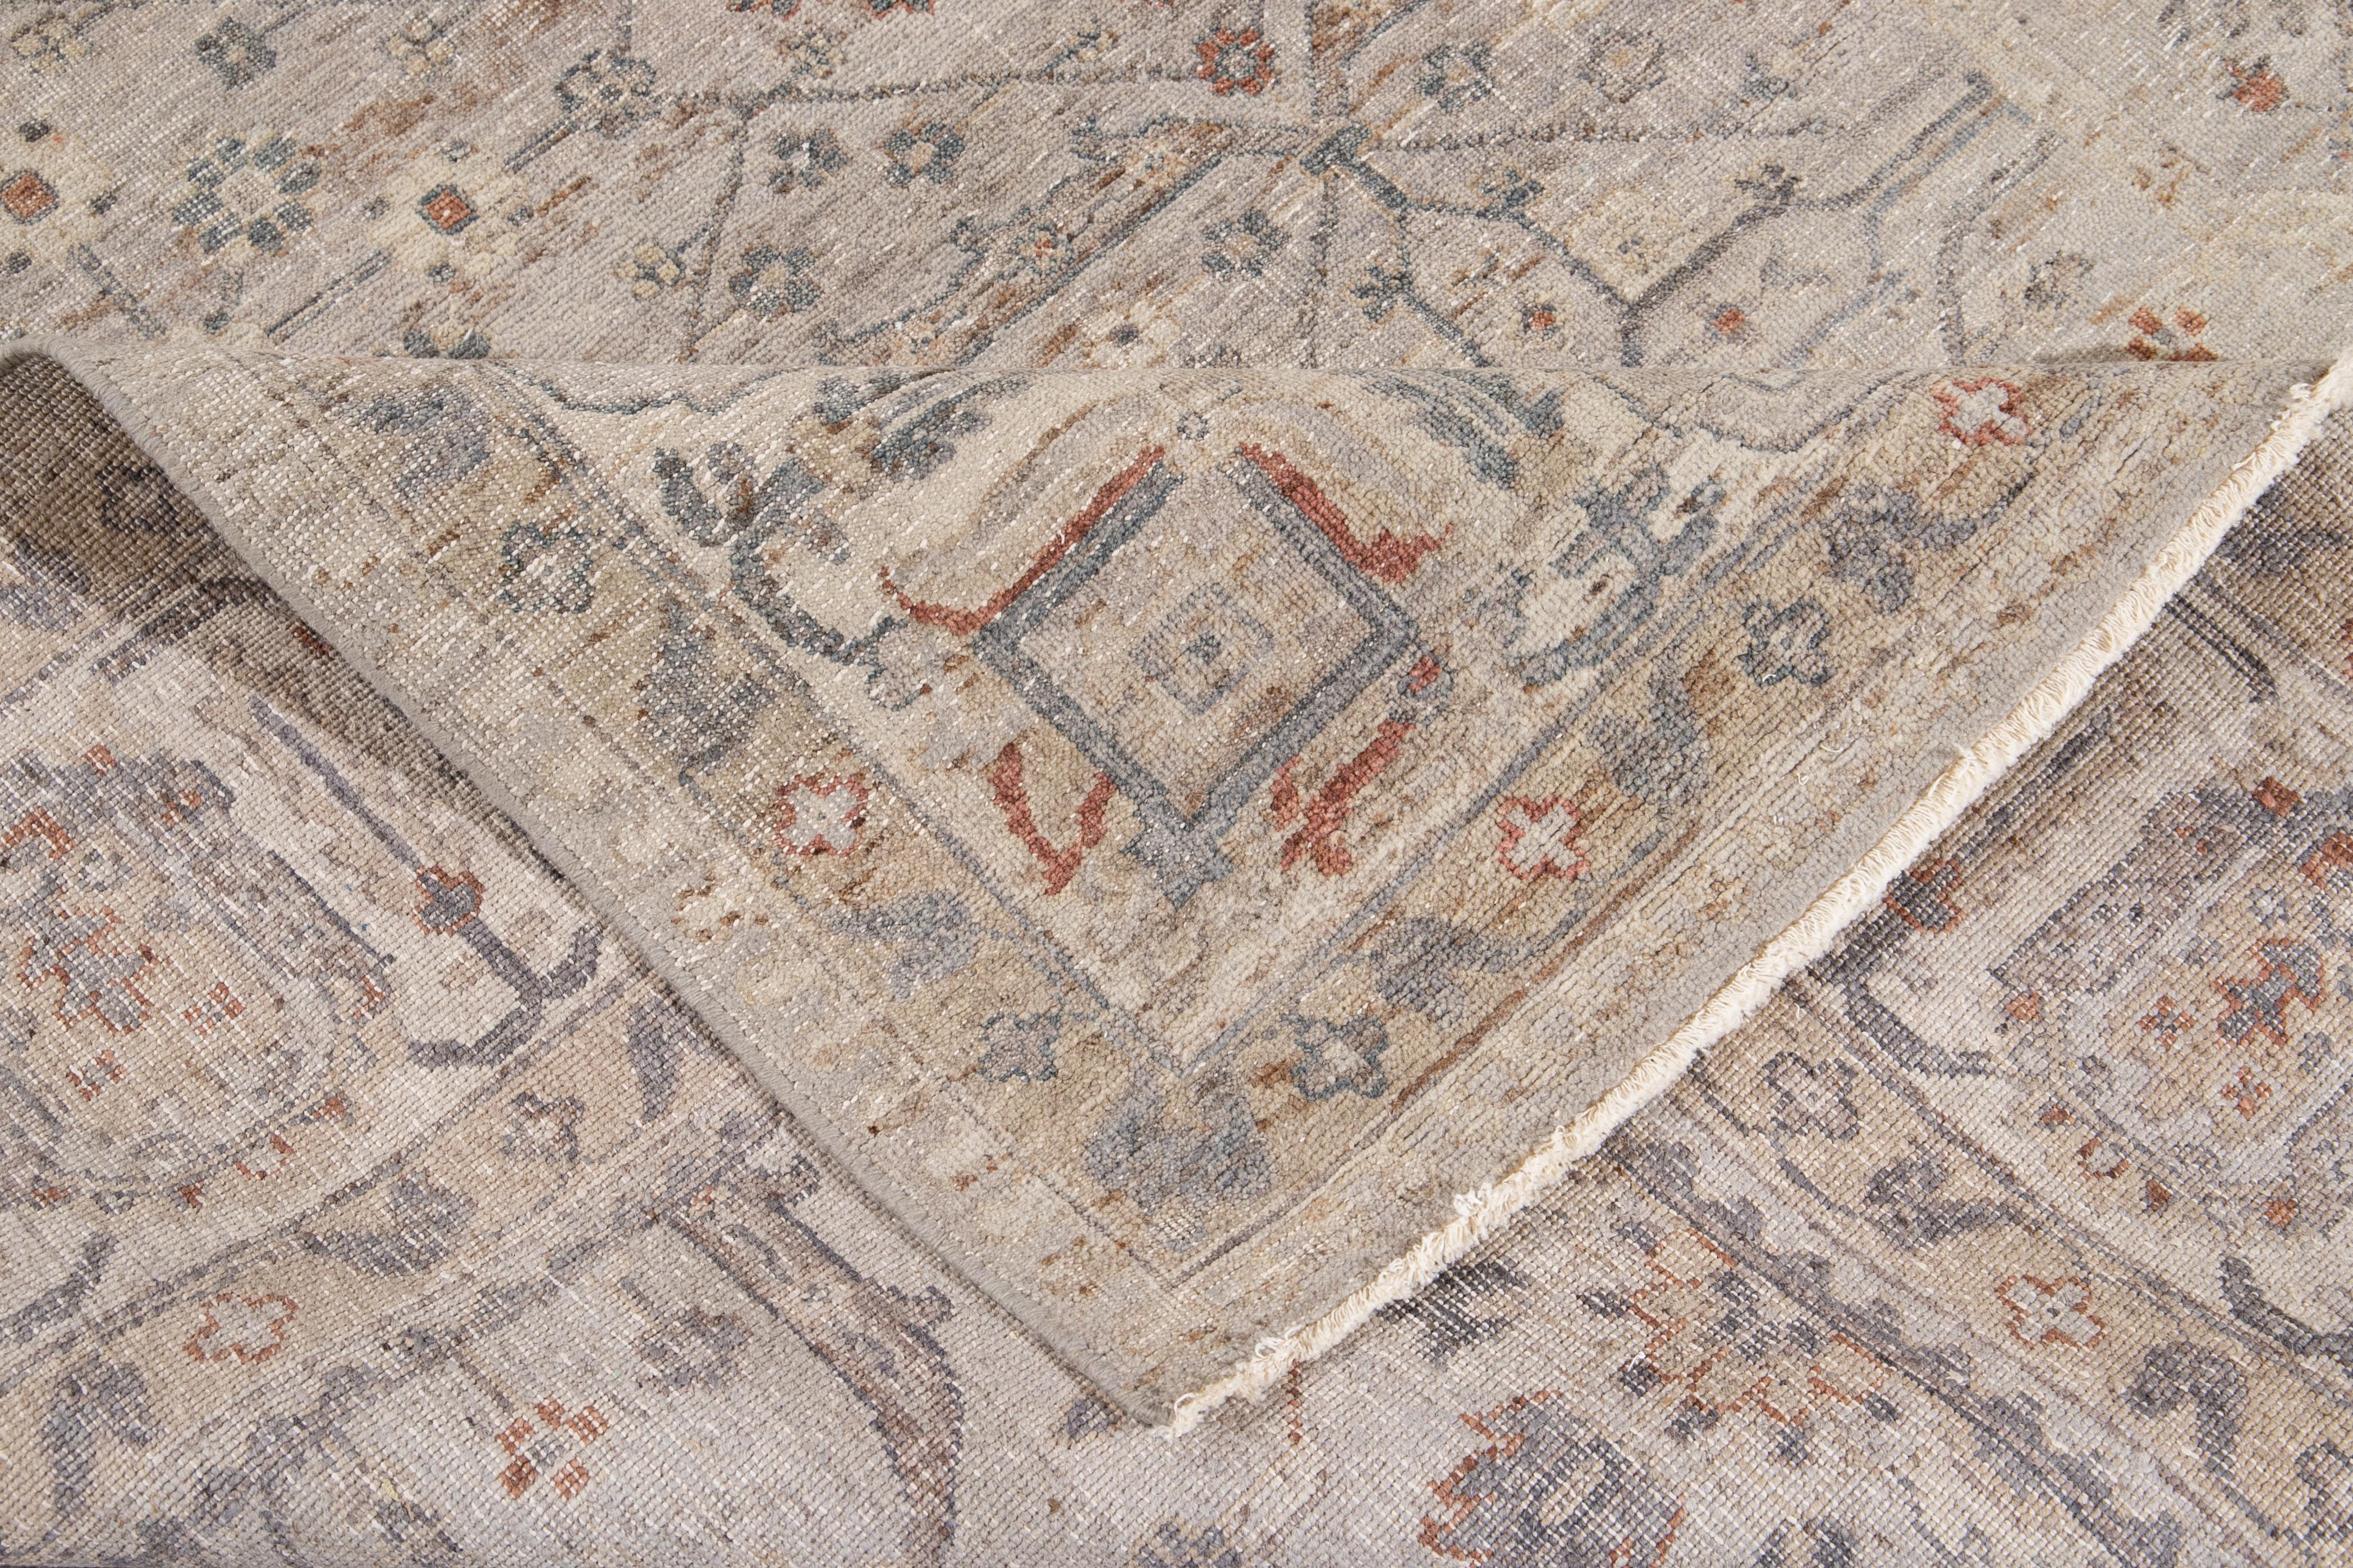 Hand-Knotted 21st Century Contemporary Indian Square Wool Rug